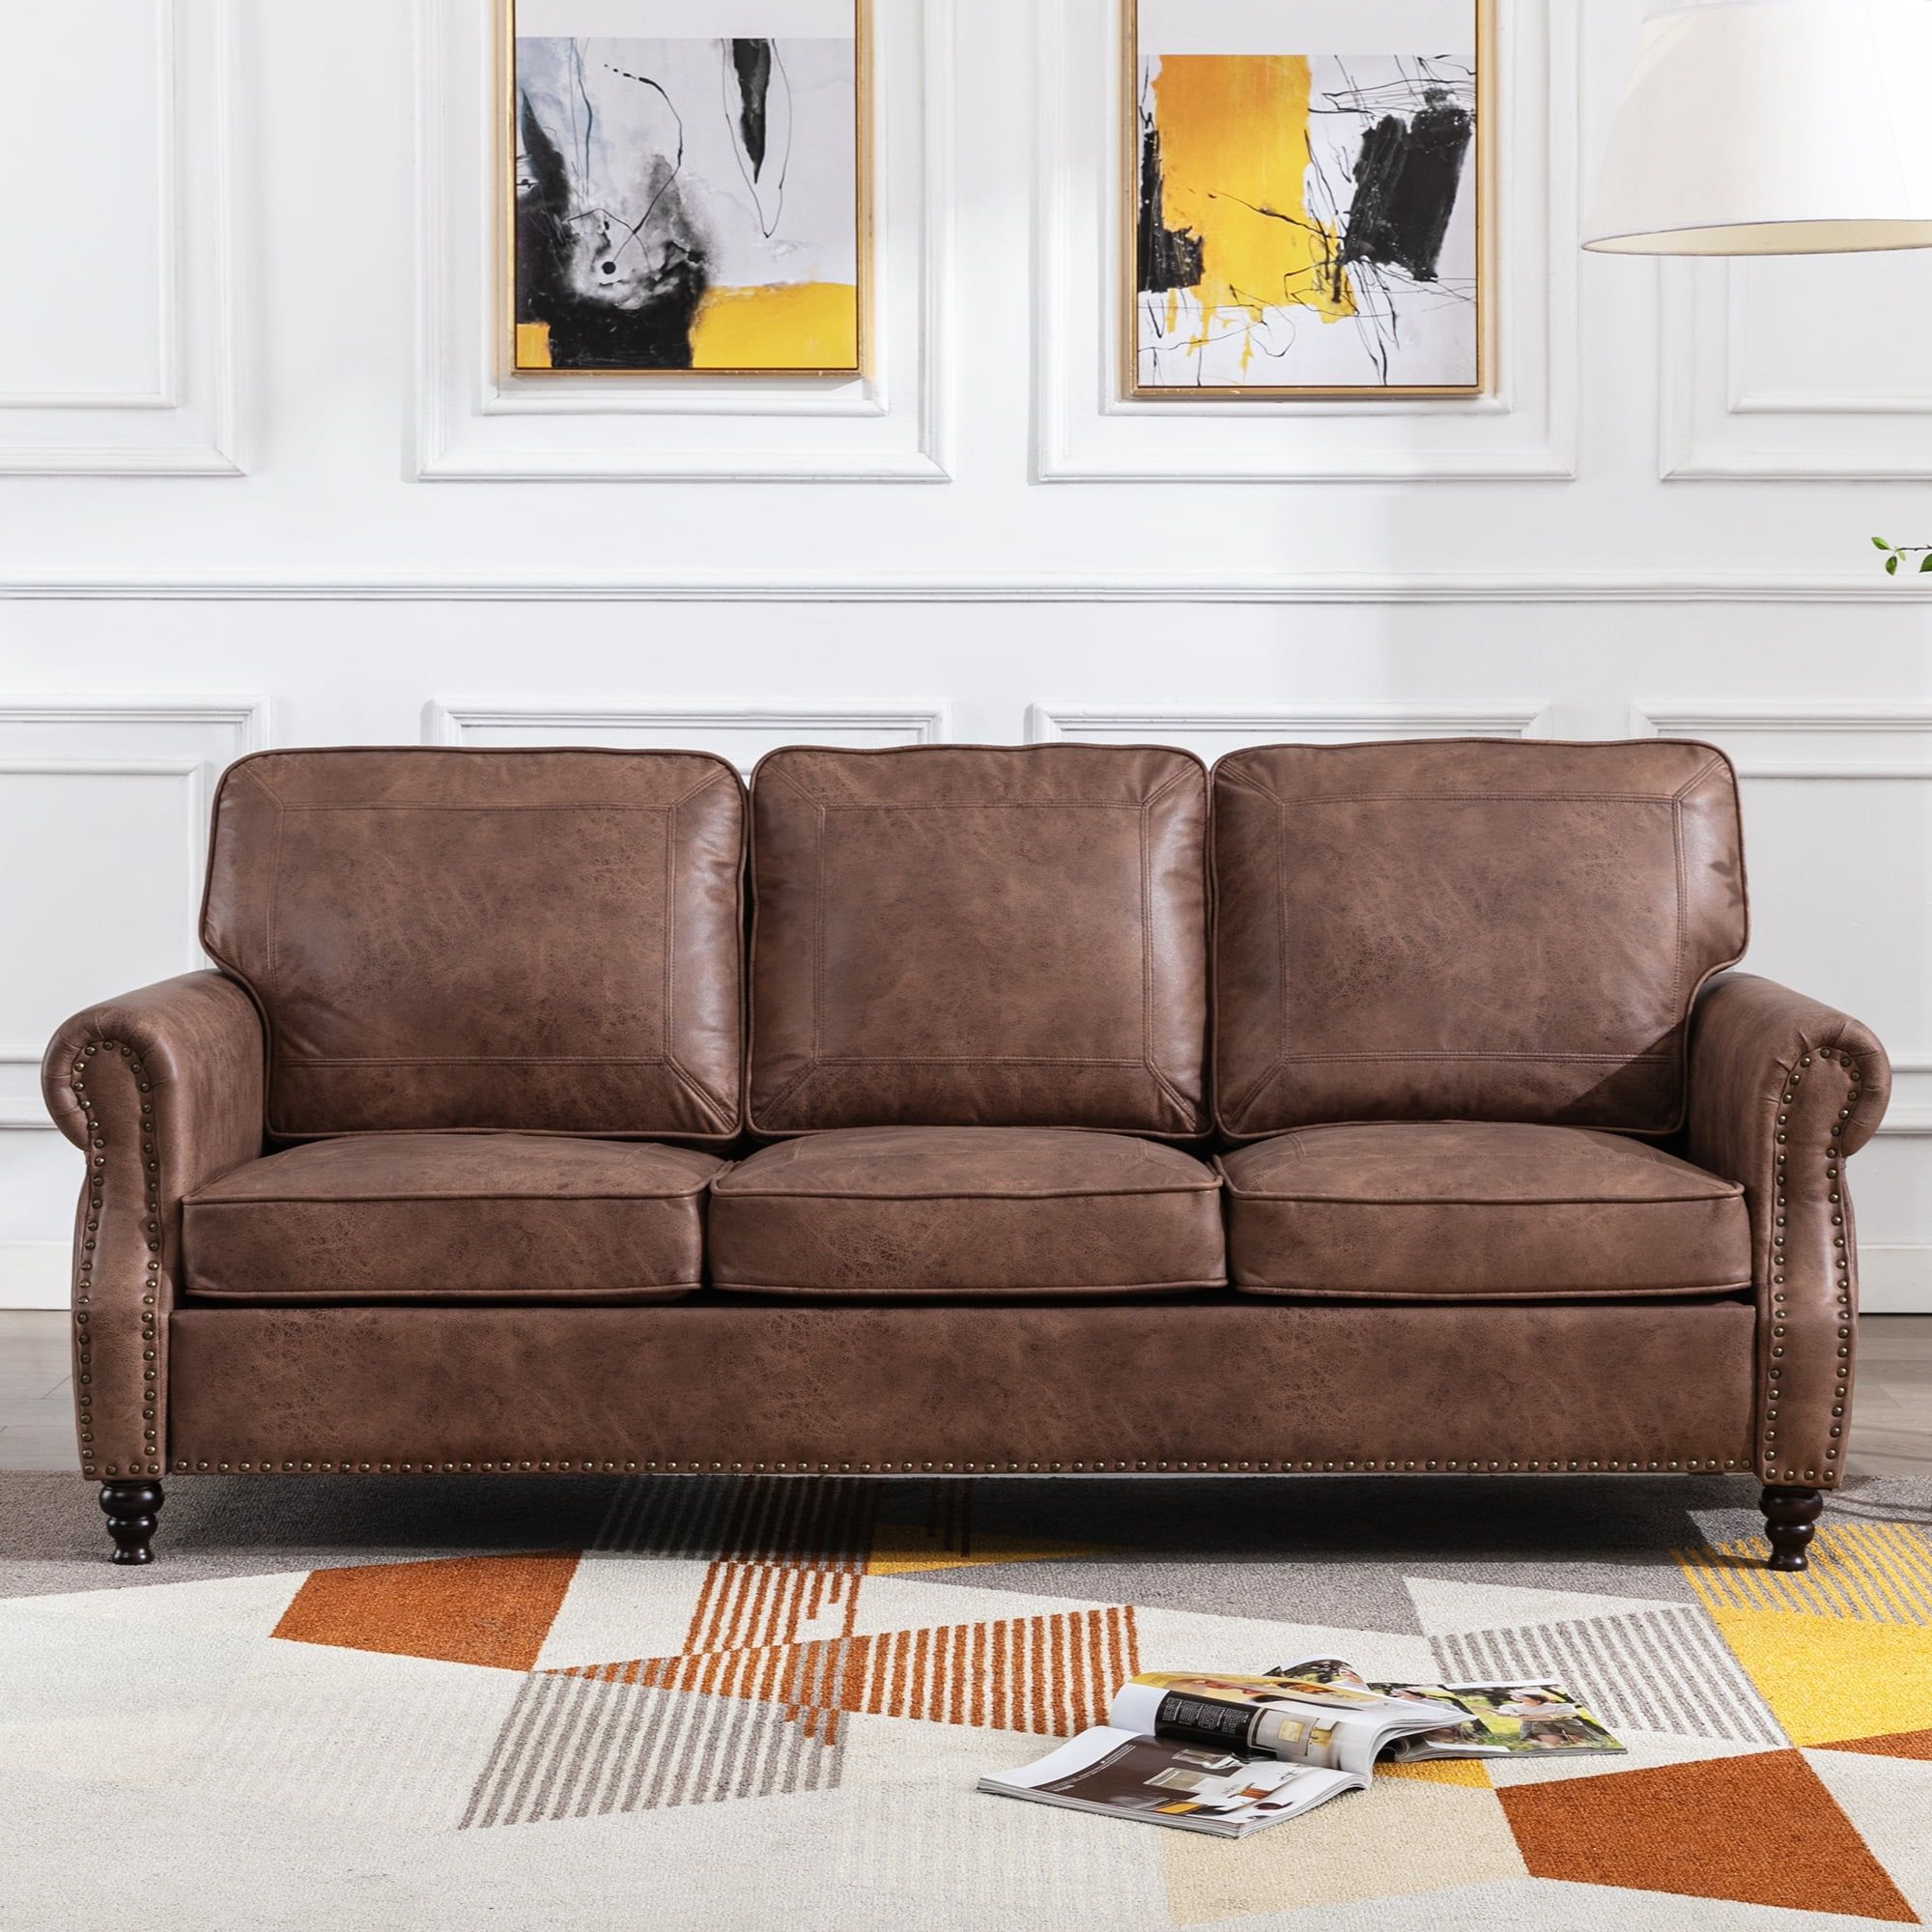 Dreamsir 80" Faux Leather Sofa Couch – Traditional 3 Seater With Nailhead  Trim, Rolled Arms, And Easy Assembly (Dark Brown) – Walmart Throughout Faux Leather Sofas In Chocolate Brown (Photo 1 of 15)